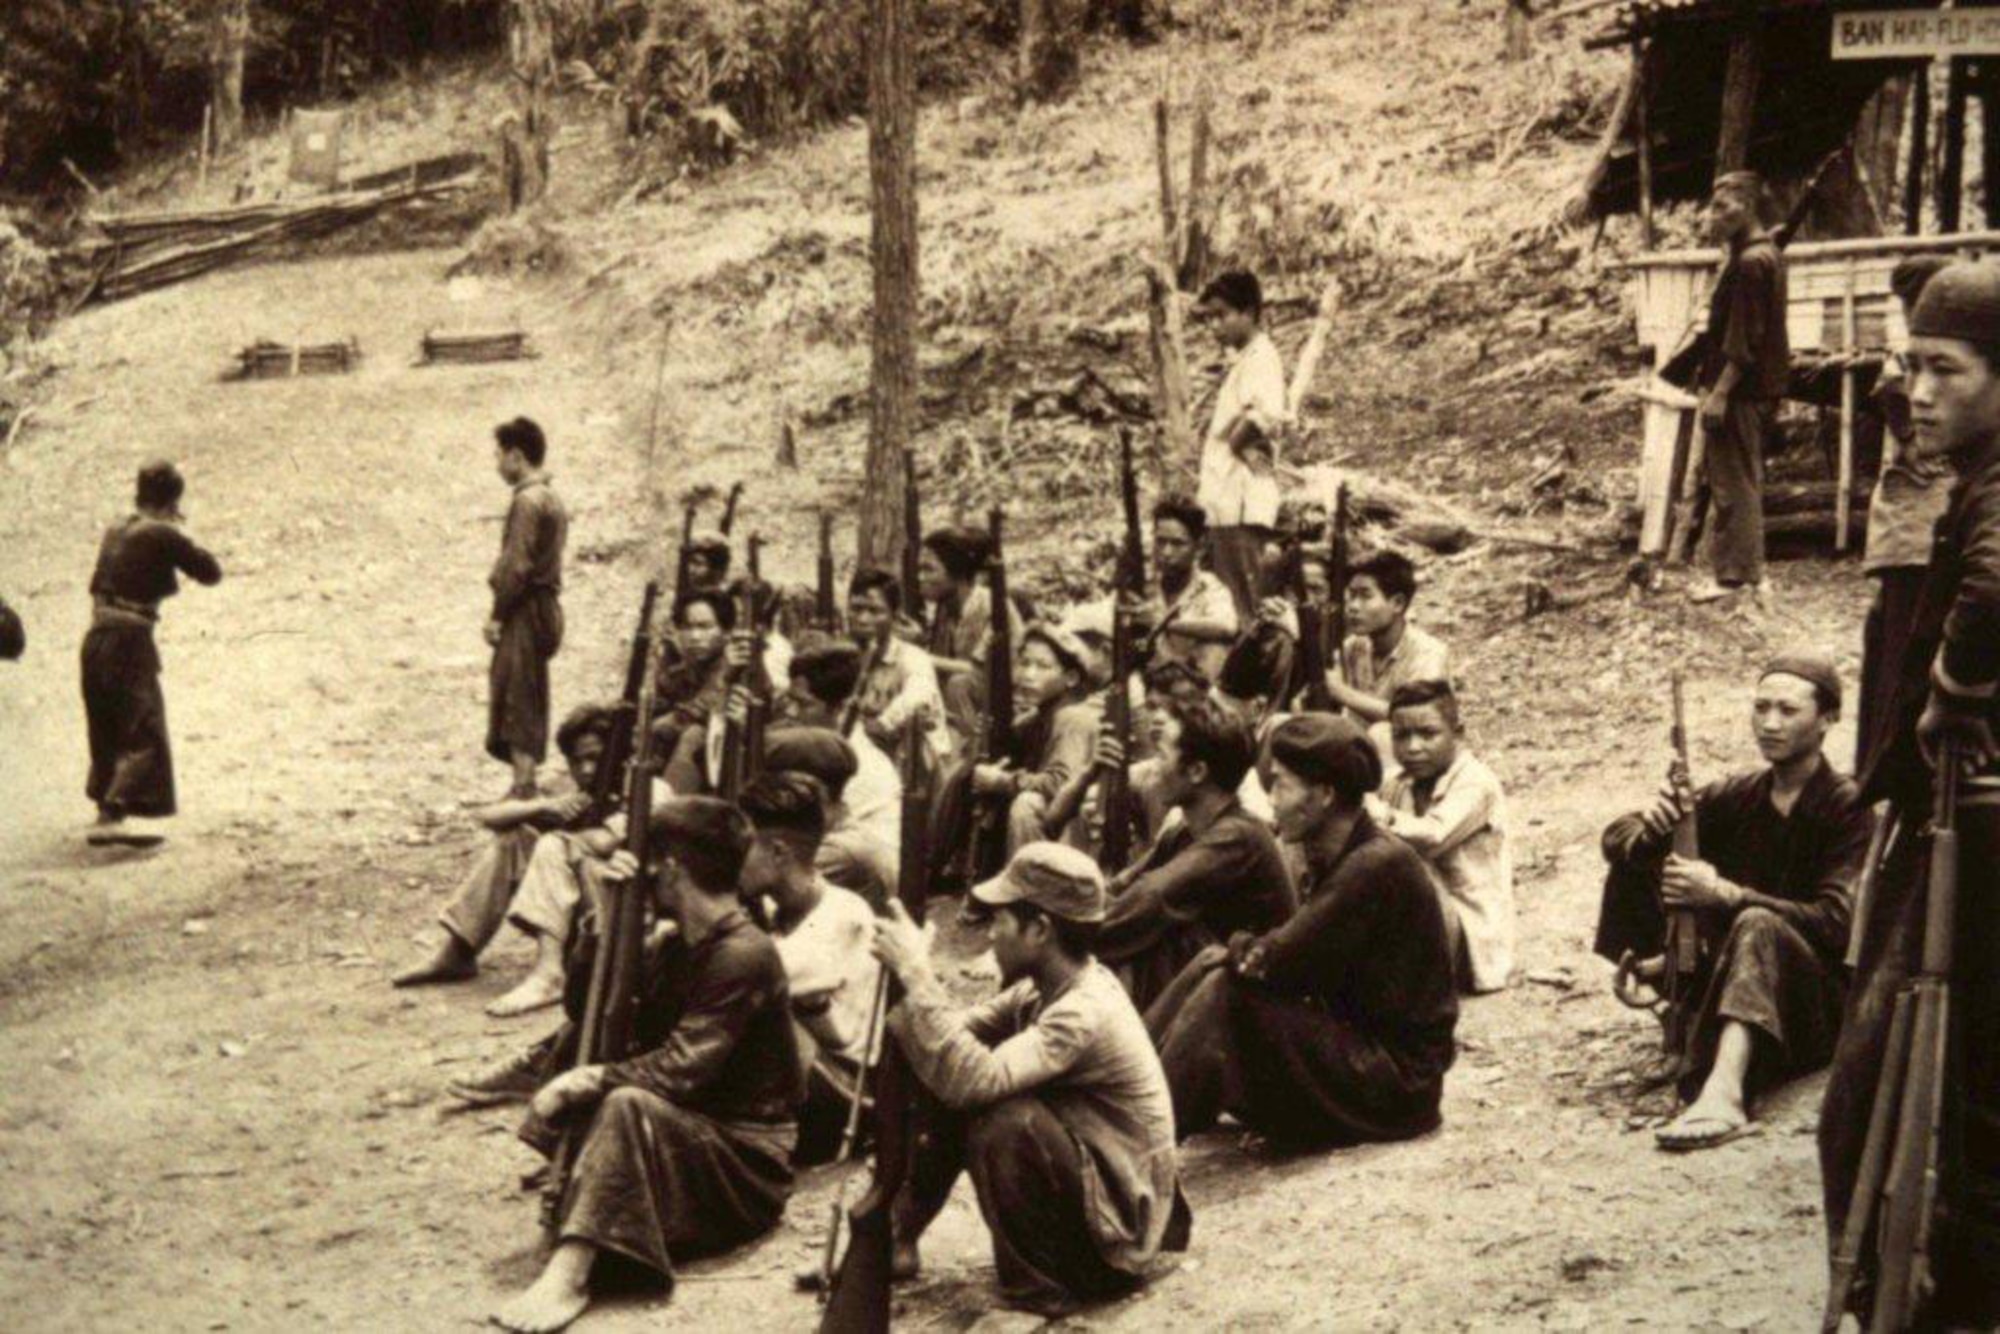 Rifle training for new Hmong recruits, early 1960s, northern Laos. (Courtesy of Hmong Archives)